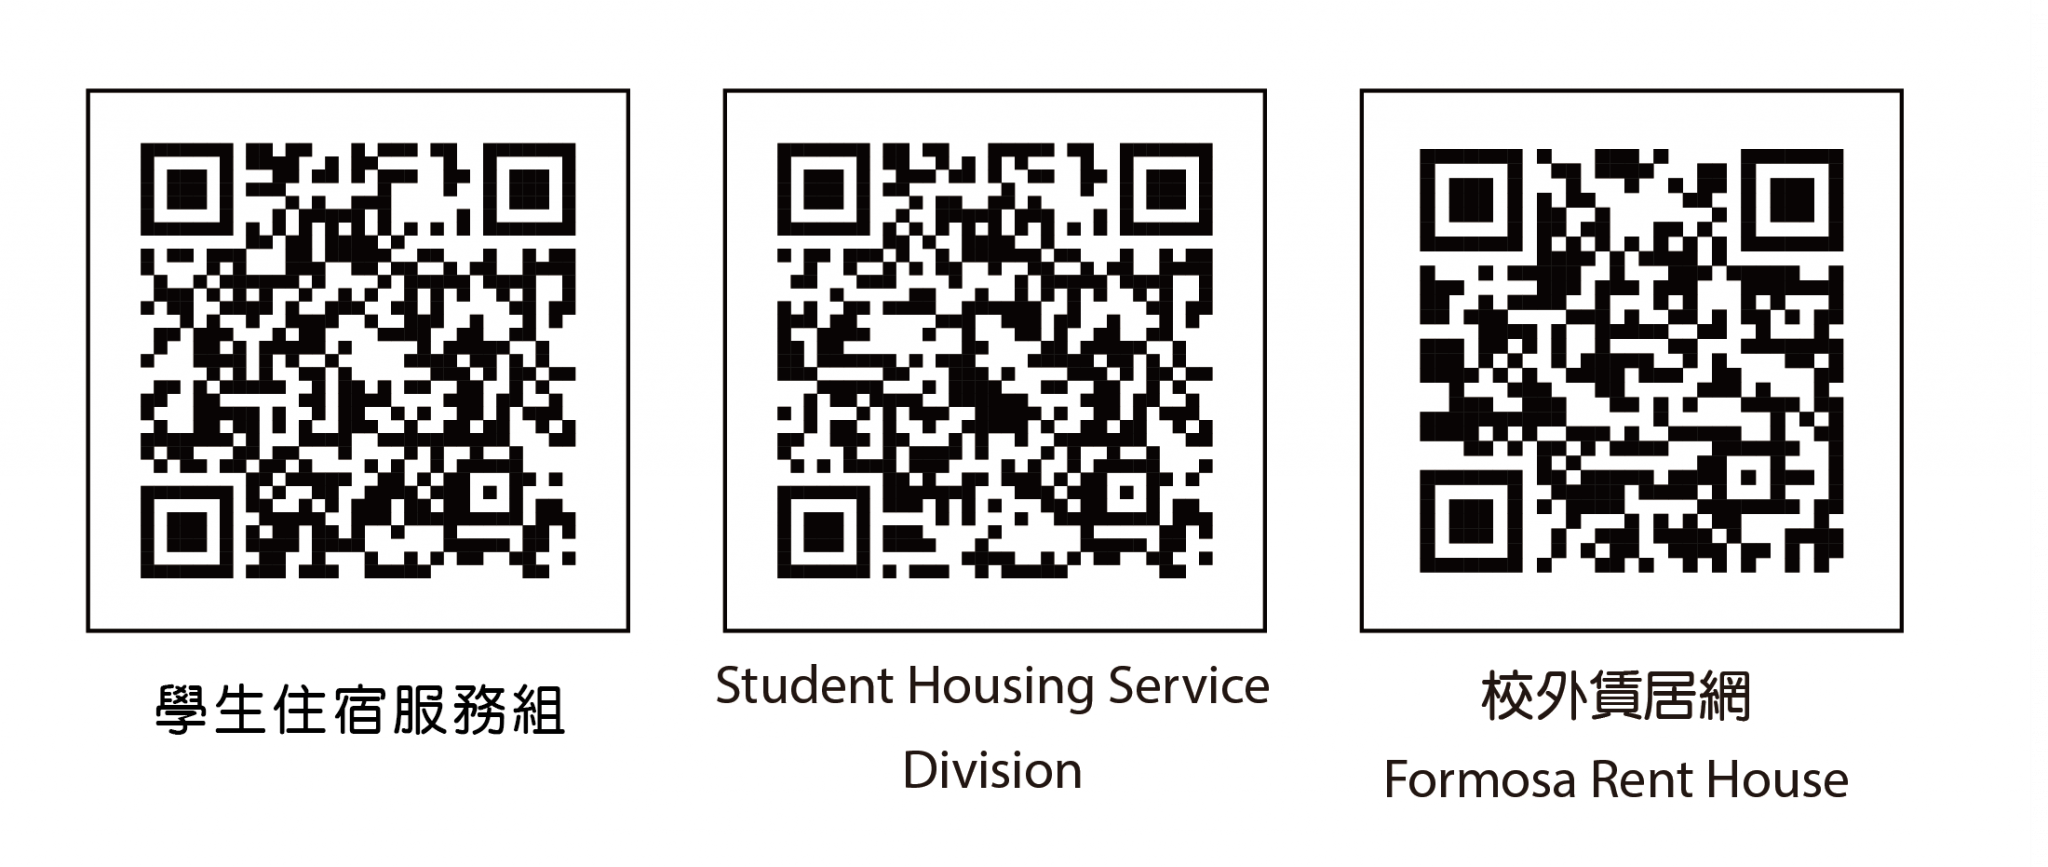 The language center of NCUE provides some off-campus housing information. 